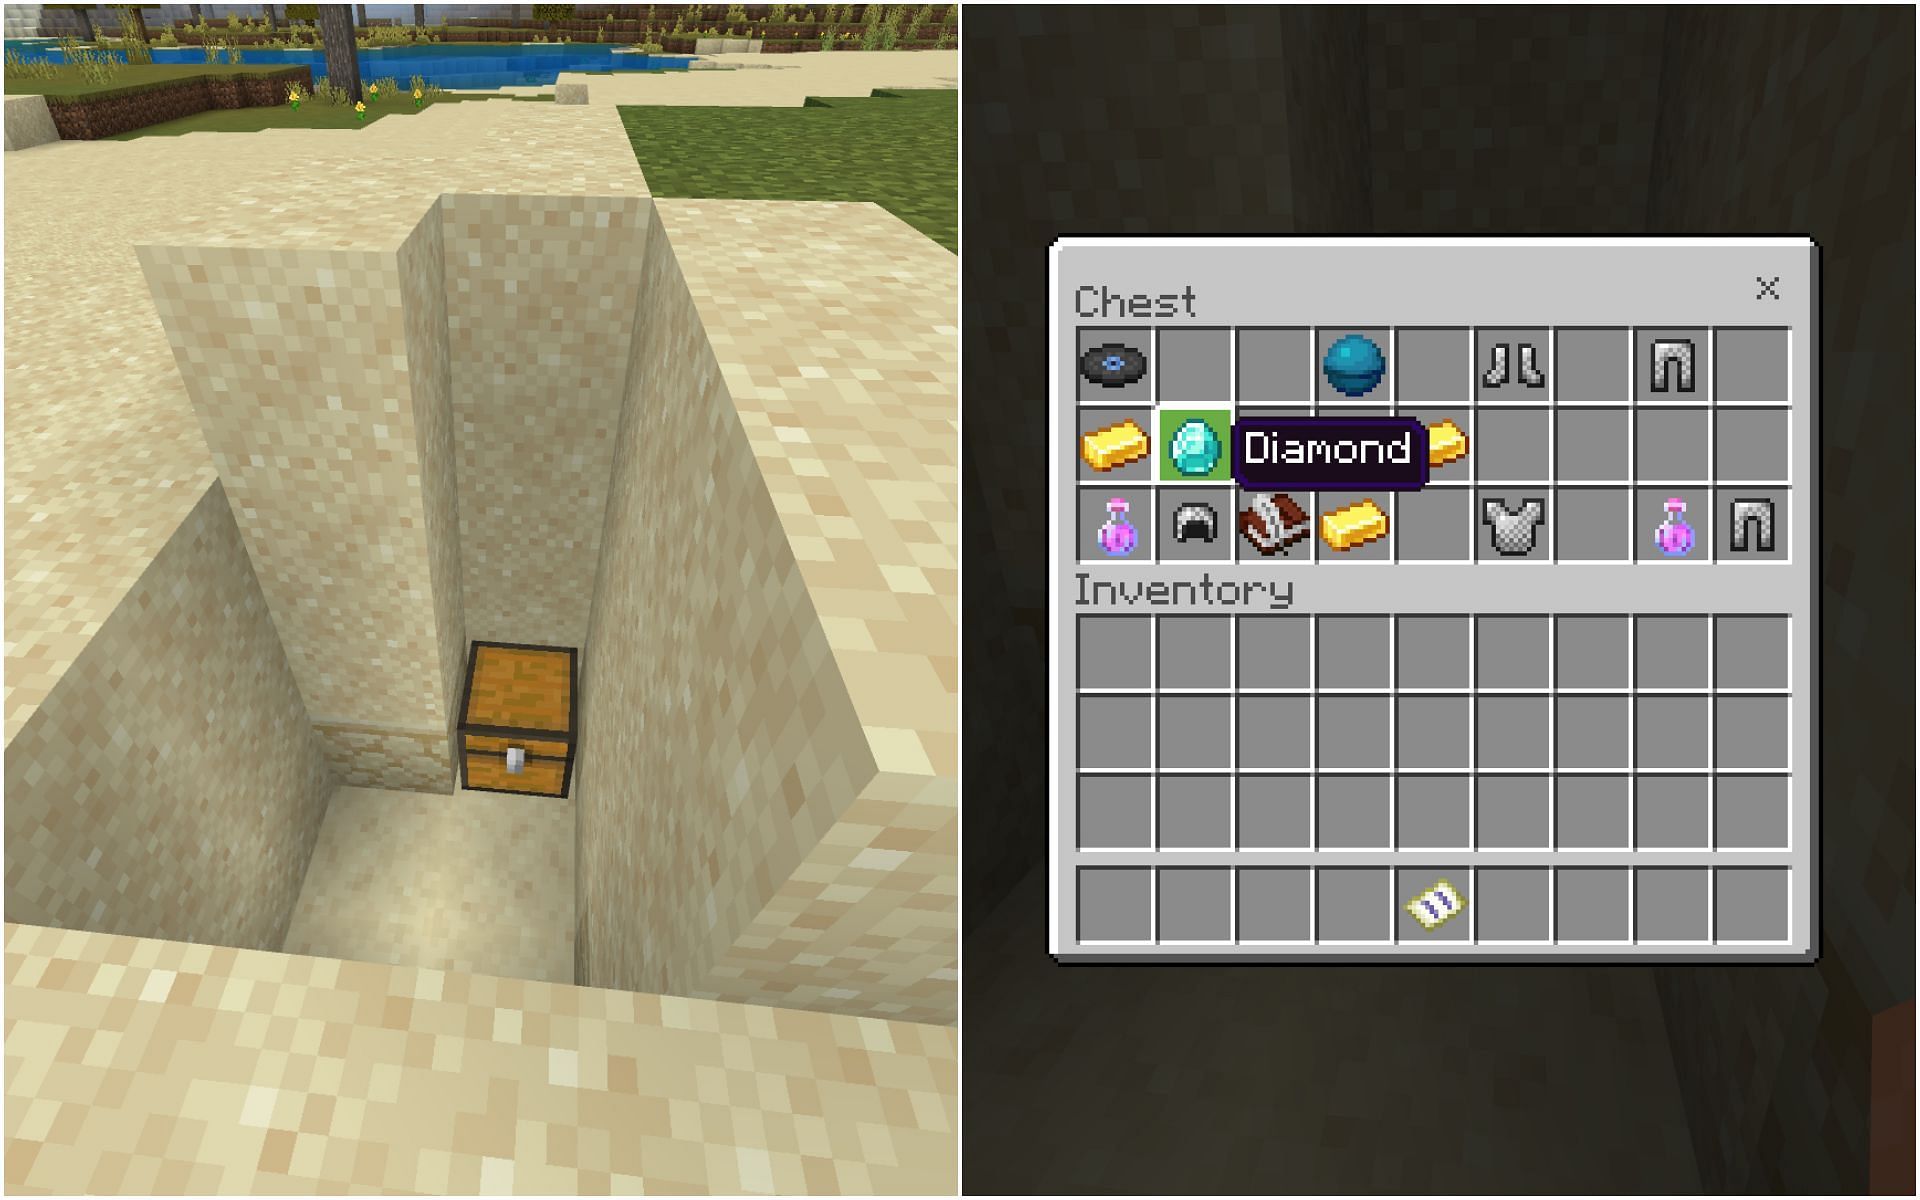 I found a cool trick to find buried treasure MUCH quicker. (Read